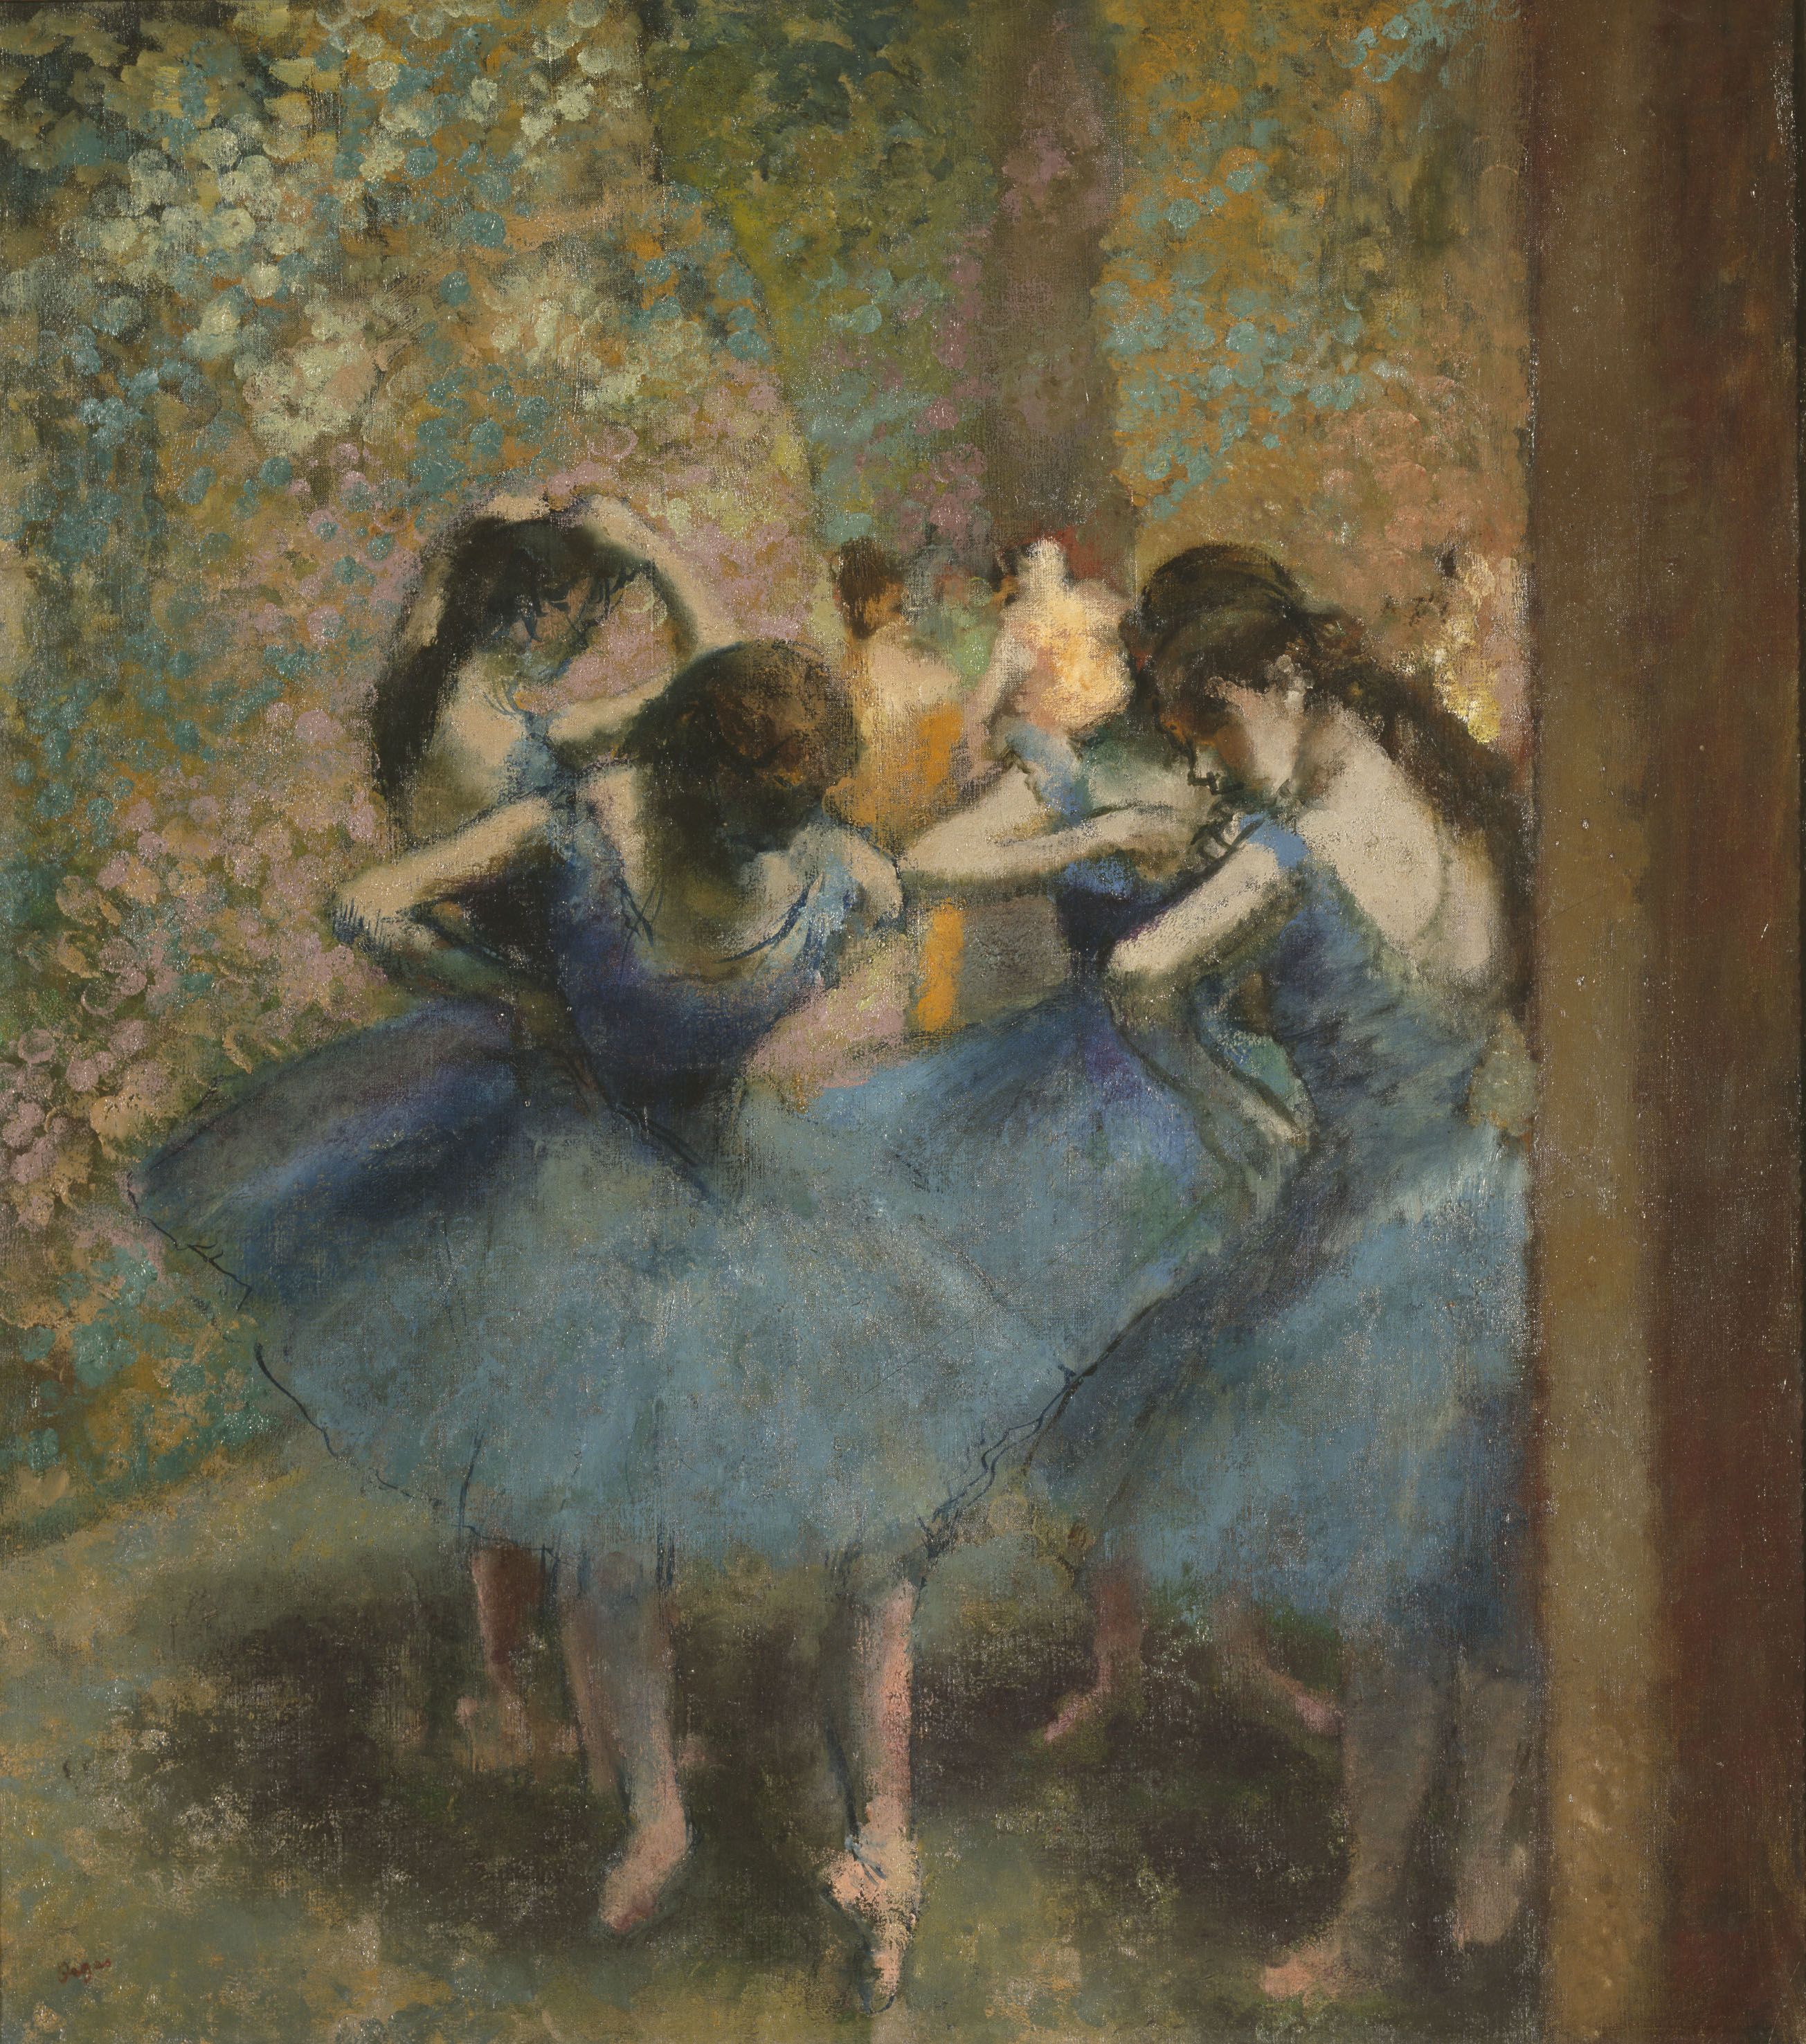 Degas Dance Drawing. A tribute to Degas with Paul Valéry, Musée d'Orsay, Paris: 28 November 2017-25 February 2018